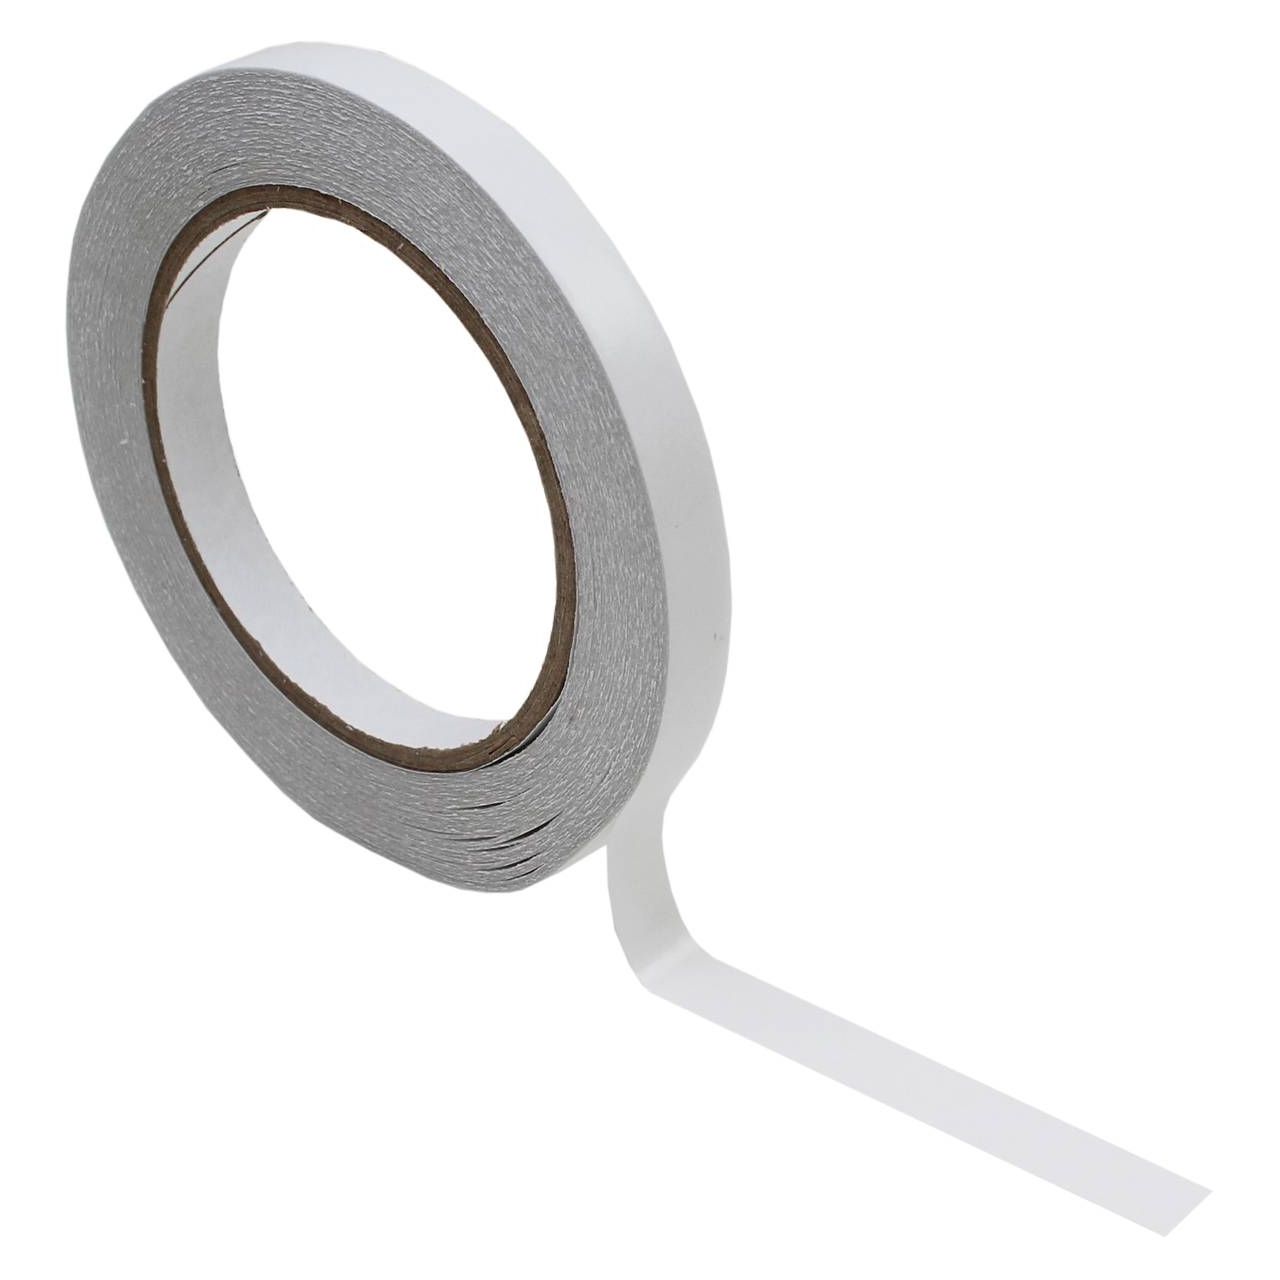 Double sided Tape - 12mm x 30 m Poly Tape